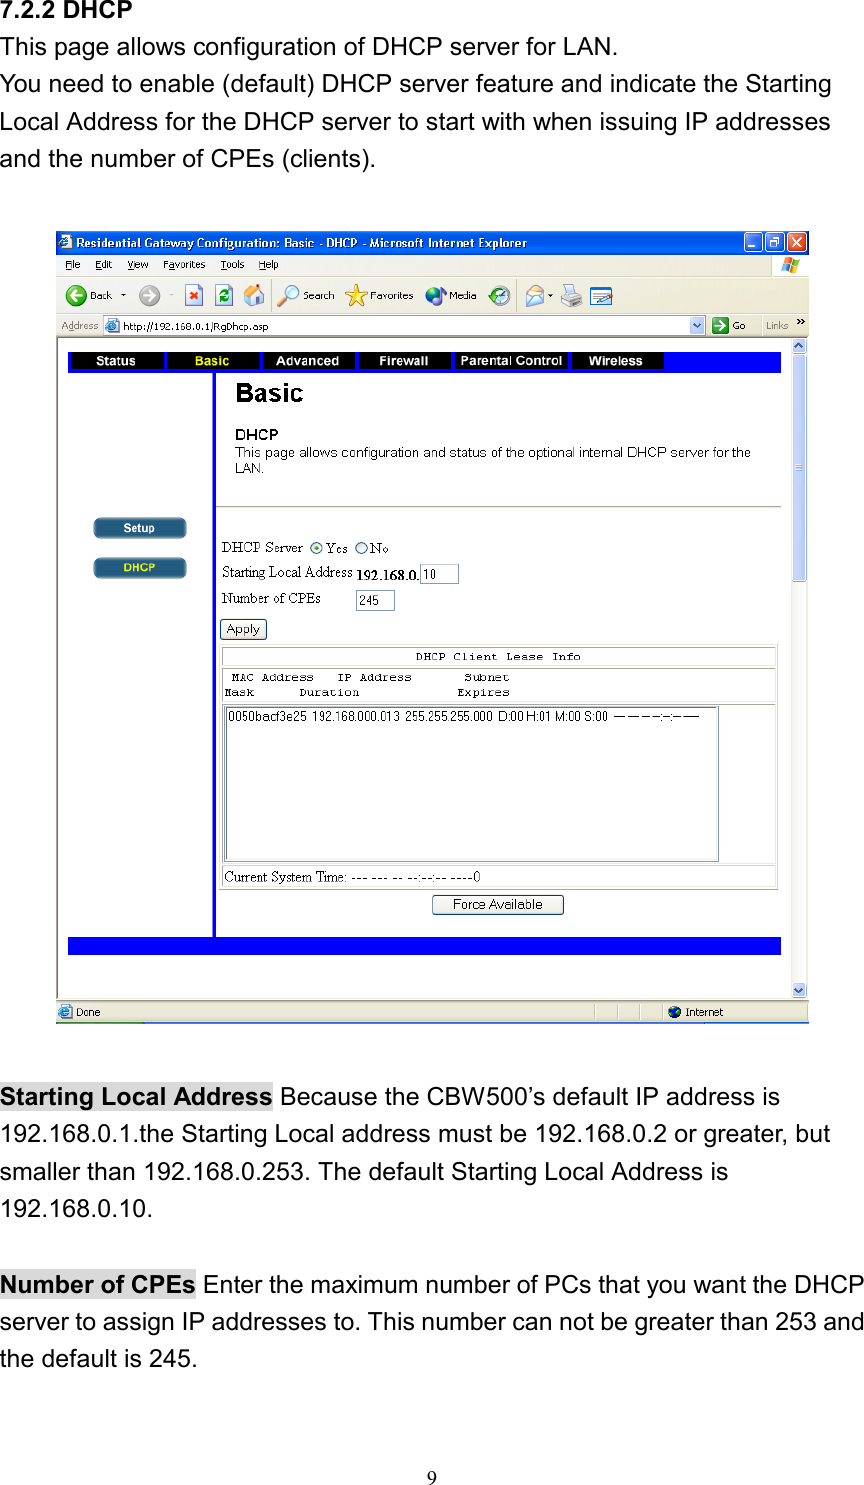 7.2.2 DHCP This page allows configuration of DHCP server for LAN. You need to enable (default) DHCP server feature and indicate the Starting Local Address for the DHCP server to start with when issuing IP addresses and the number of CPEs (clients).    Starting Local Address Because the CBW500’s default IP address is 192.168.0.1.the Starting Local address must be 192.168.0.2 or greater, but smaller than 192.168.0.253. The default Starting Local Address is 192.168.0.10.  Number of CPEs Enter the maximum number of PCs that you want the DHCP server to assign IP addresses to. This number can not be greater than 253 and the default is 245.   9 